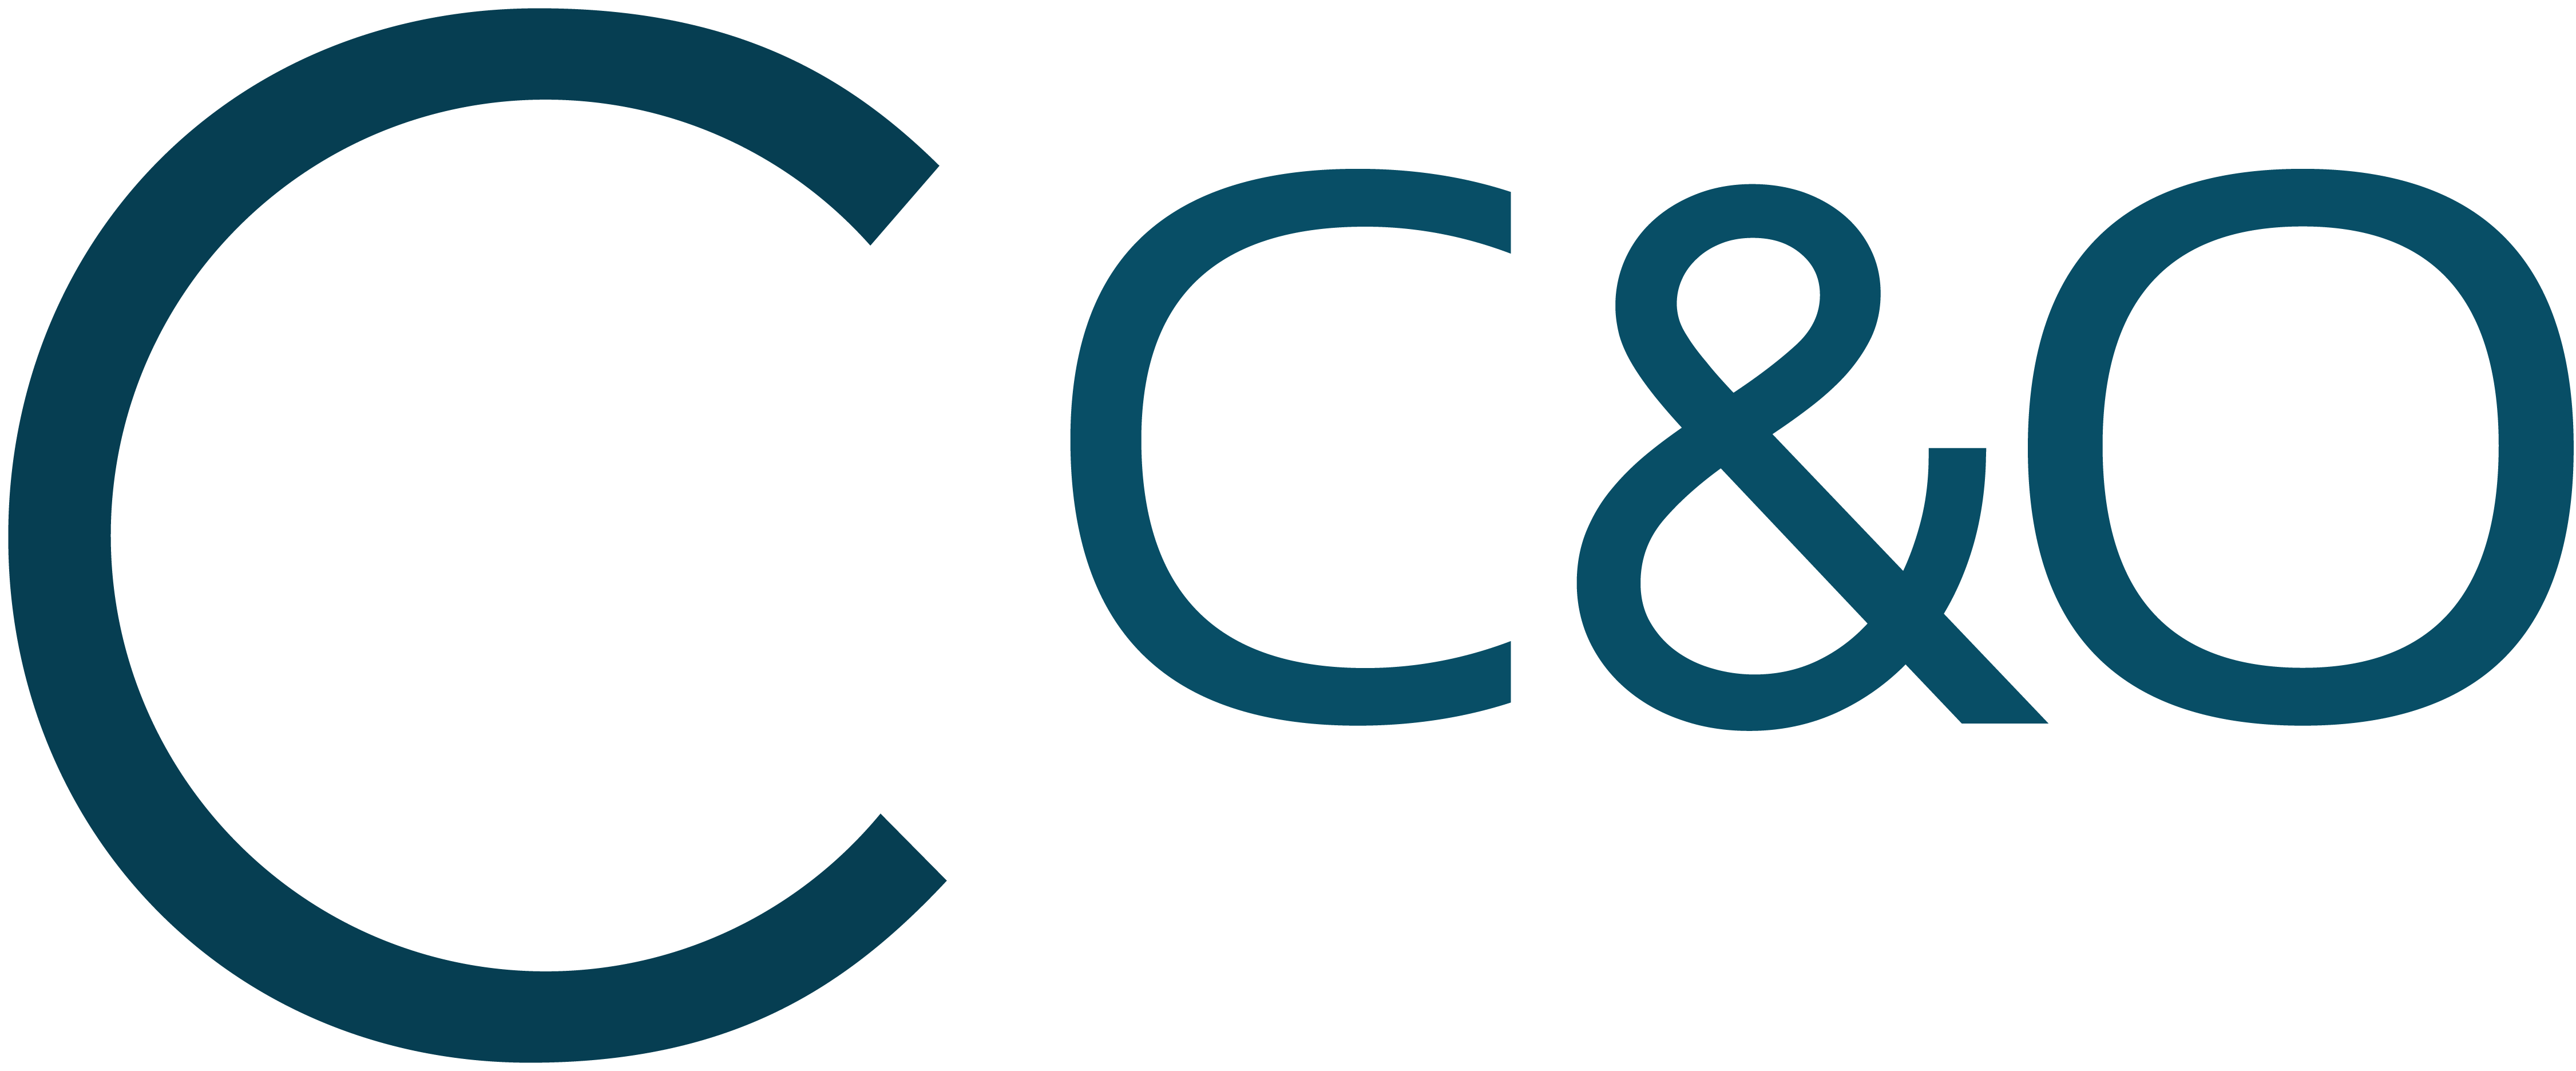 C&O 360 Renovations - REO Property Management and Preservation Logo